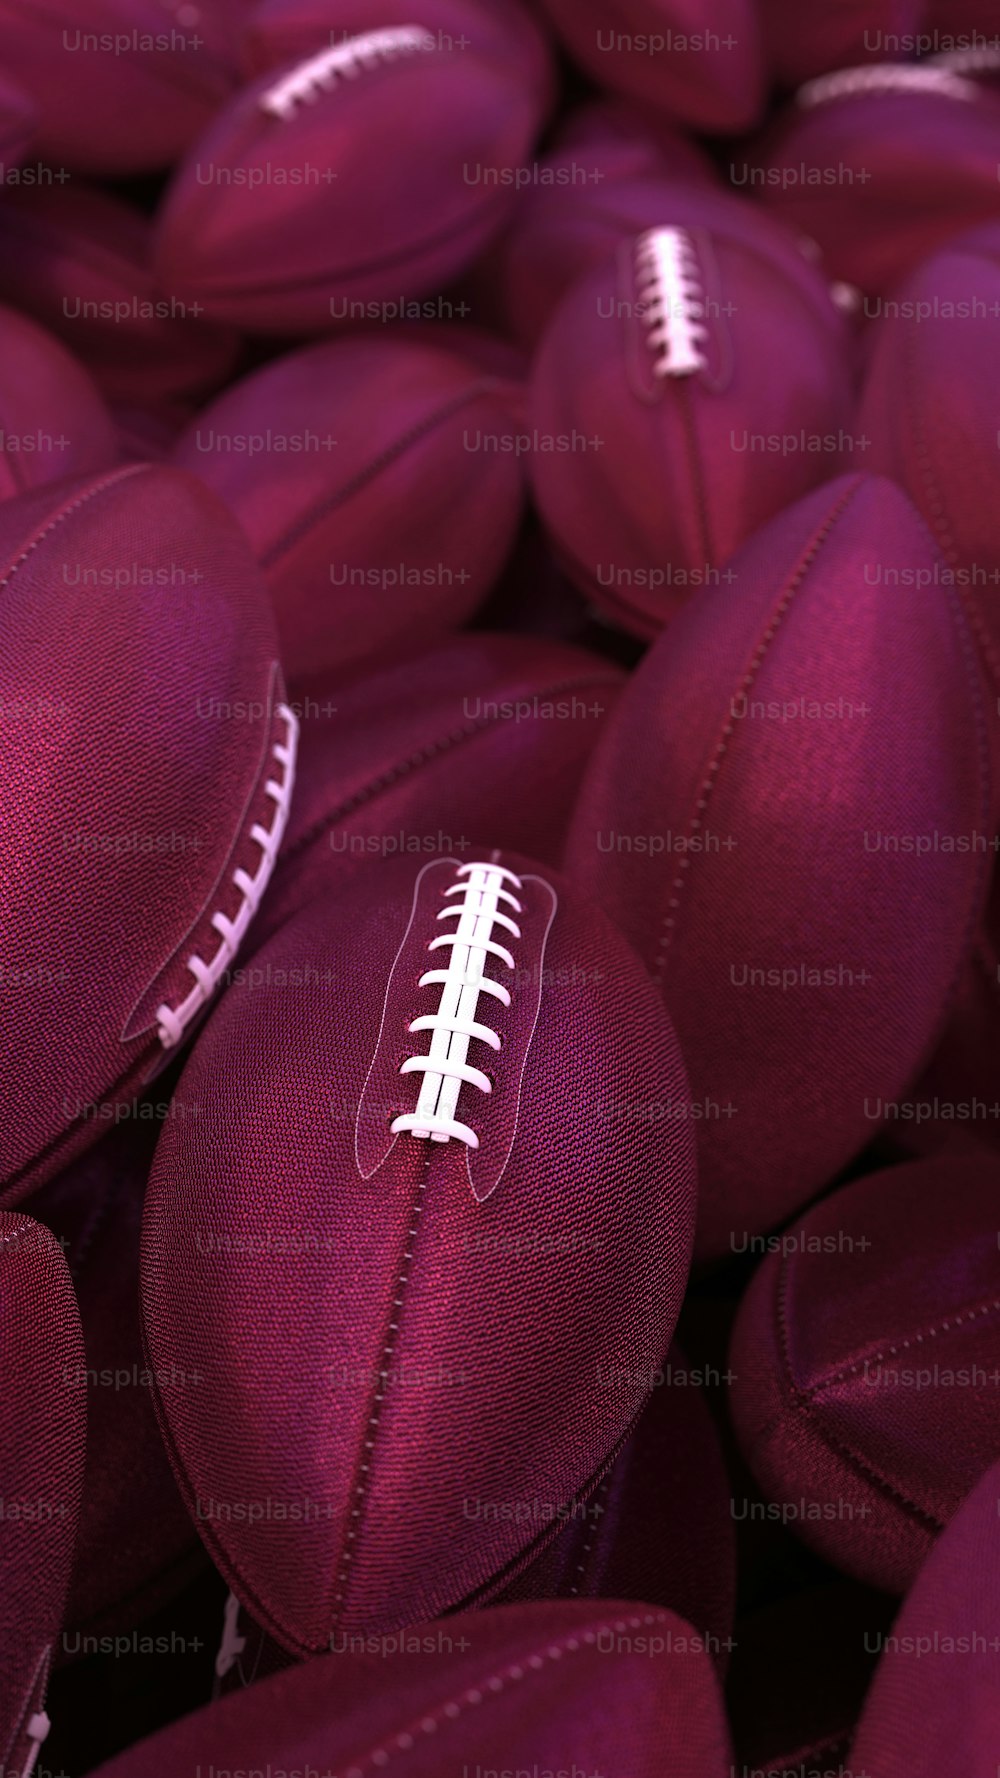 a pile of purple footballs with white stitching on them